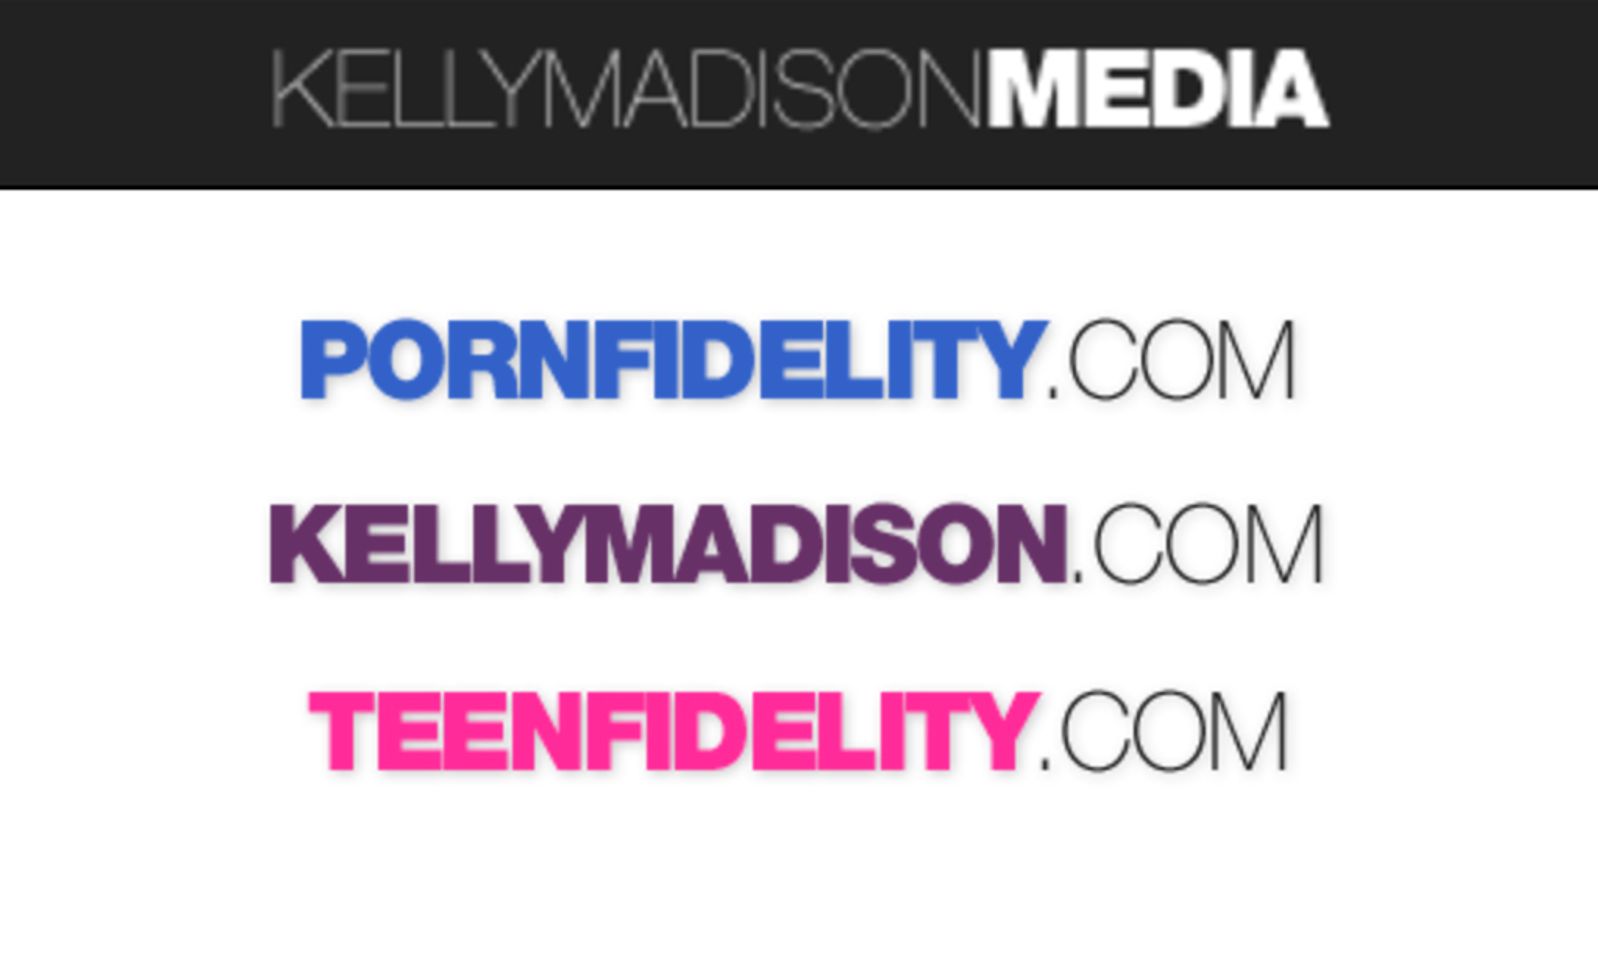 Kelly Madison Media Wins Most Outrageous at 2014 AVN Awards